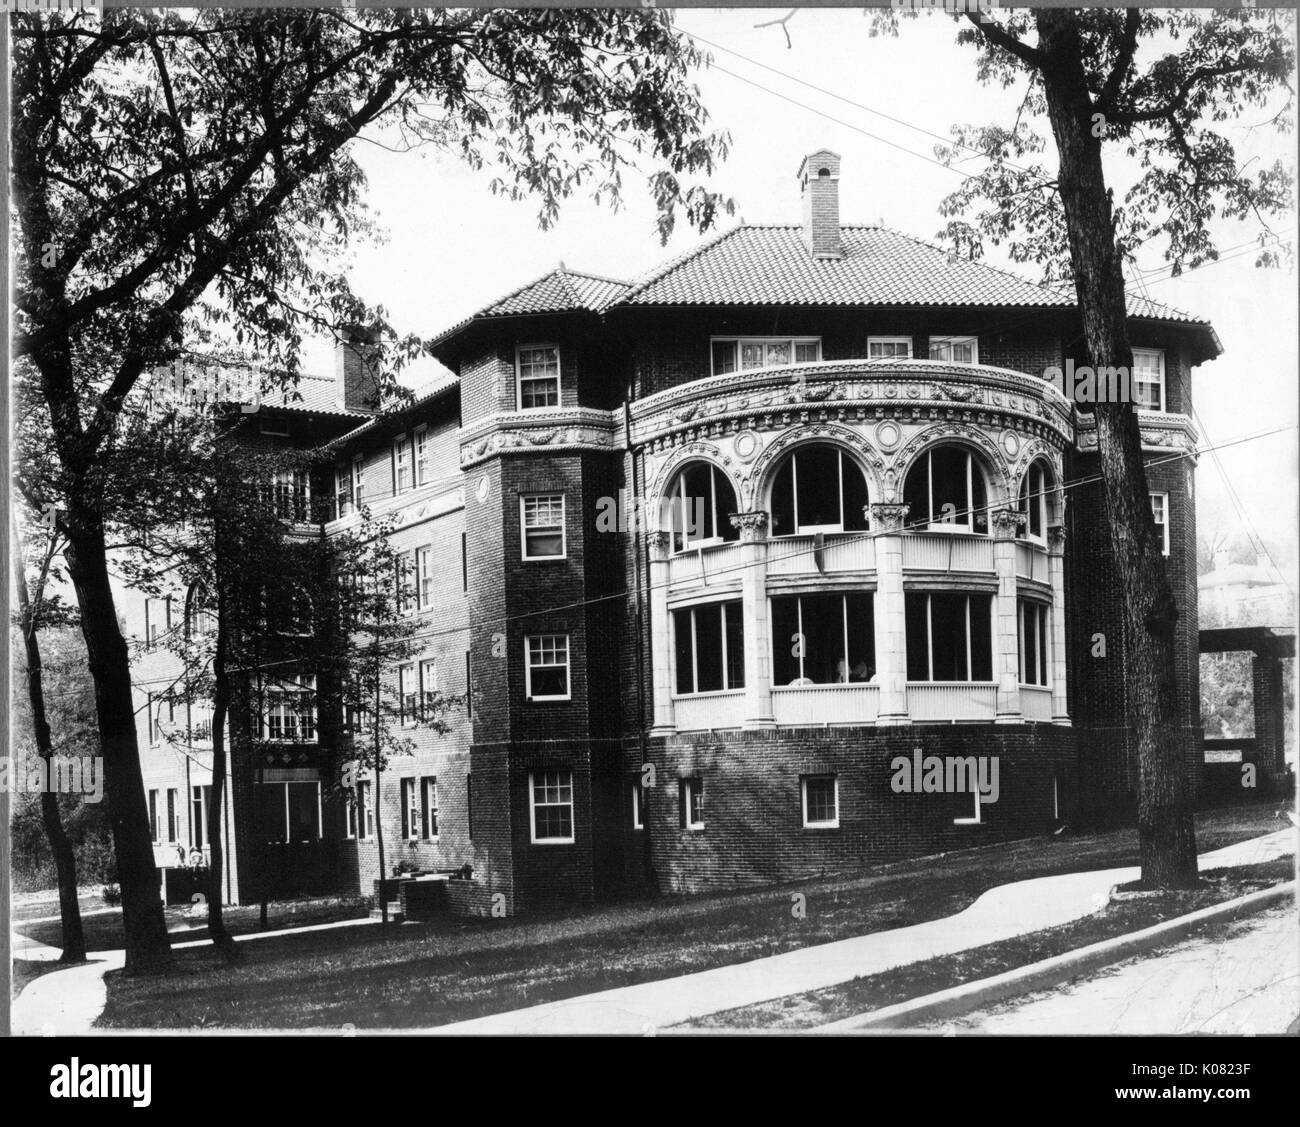 A large, four-story brick building with ornate stone accents, possibly a home, situated among trees on a street with a sidewalk in Baltimore, Maryland, 1910. Stock Photo